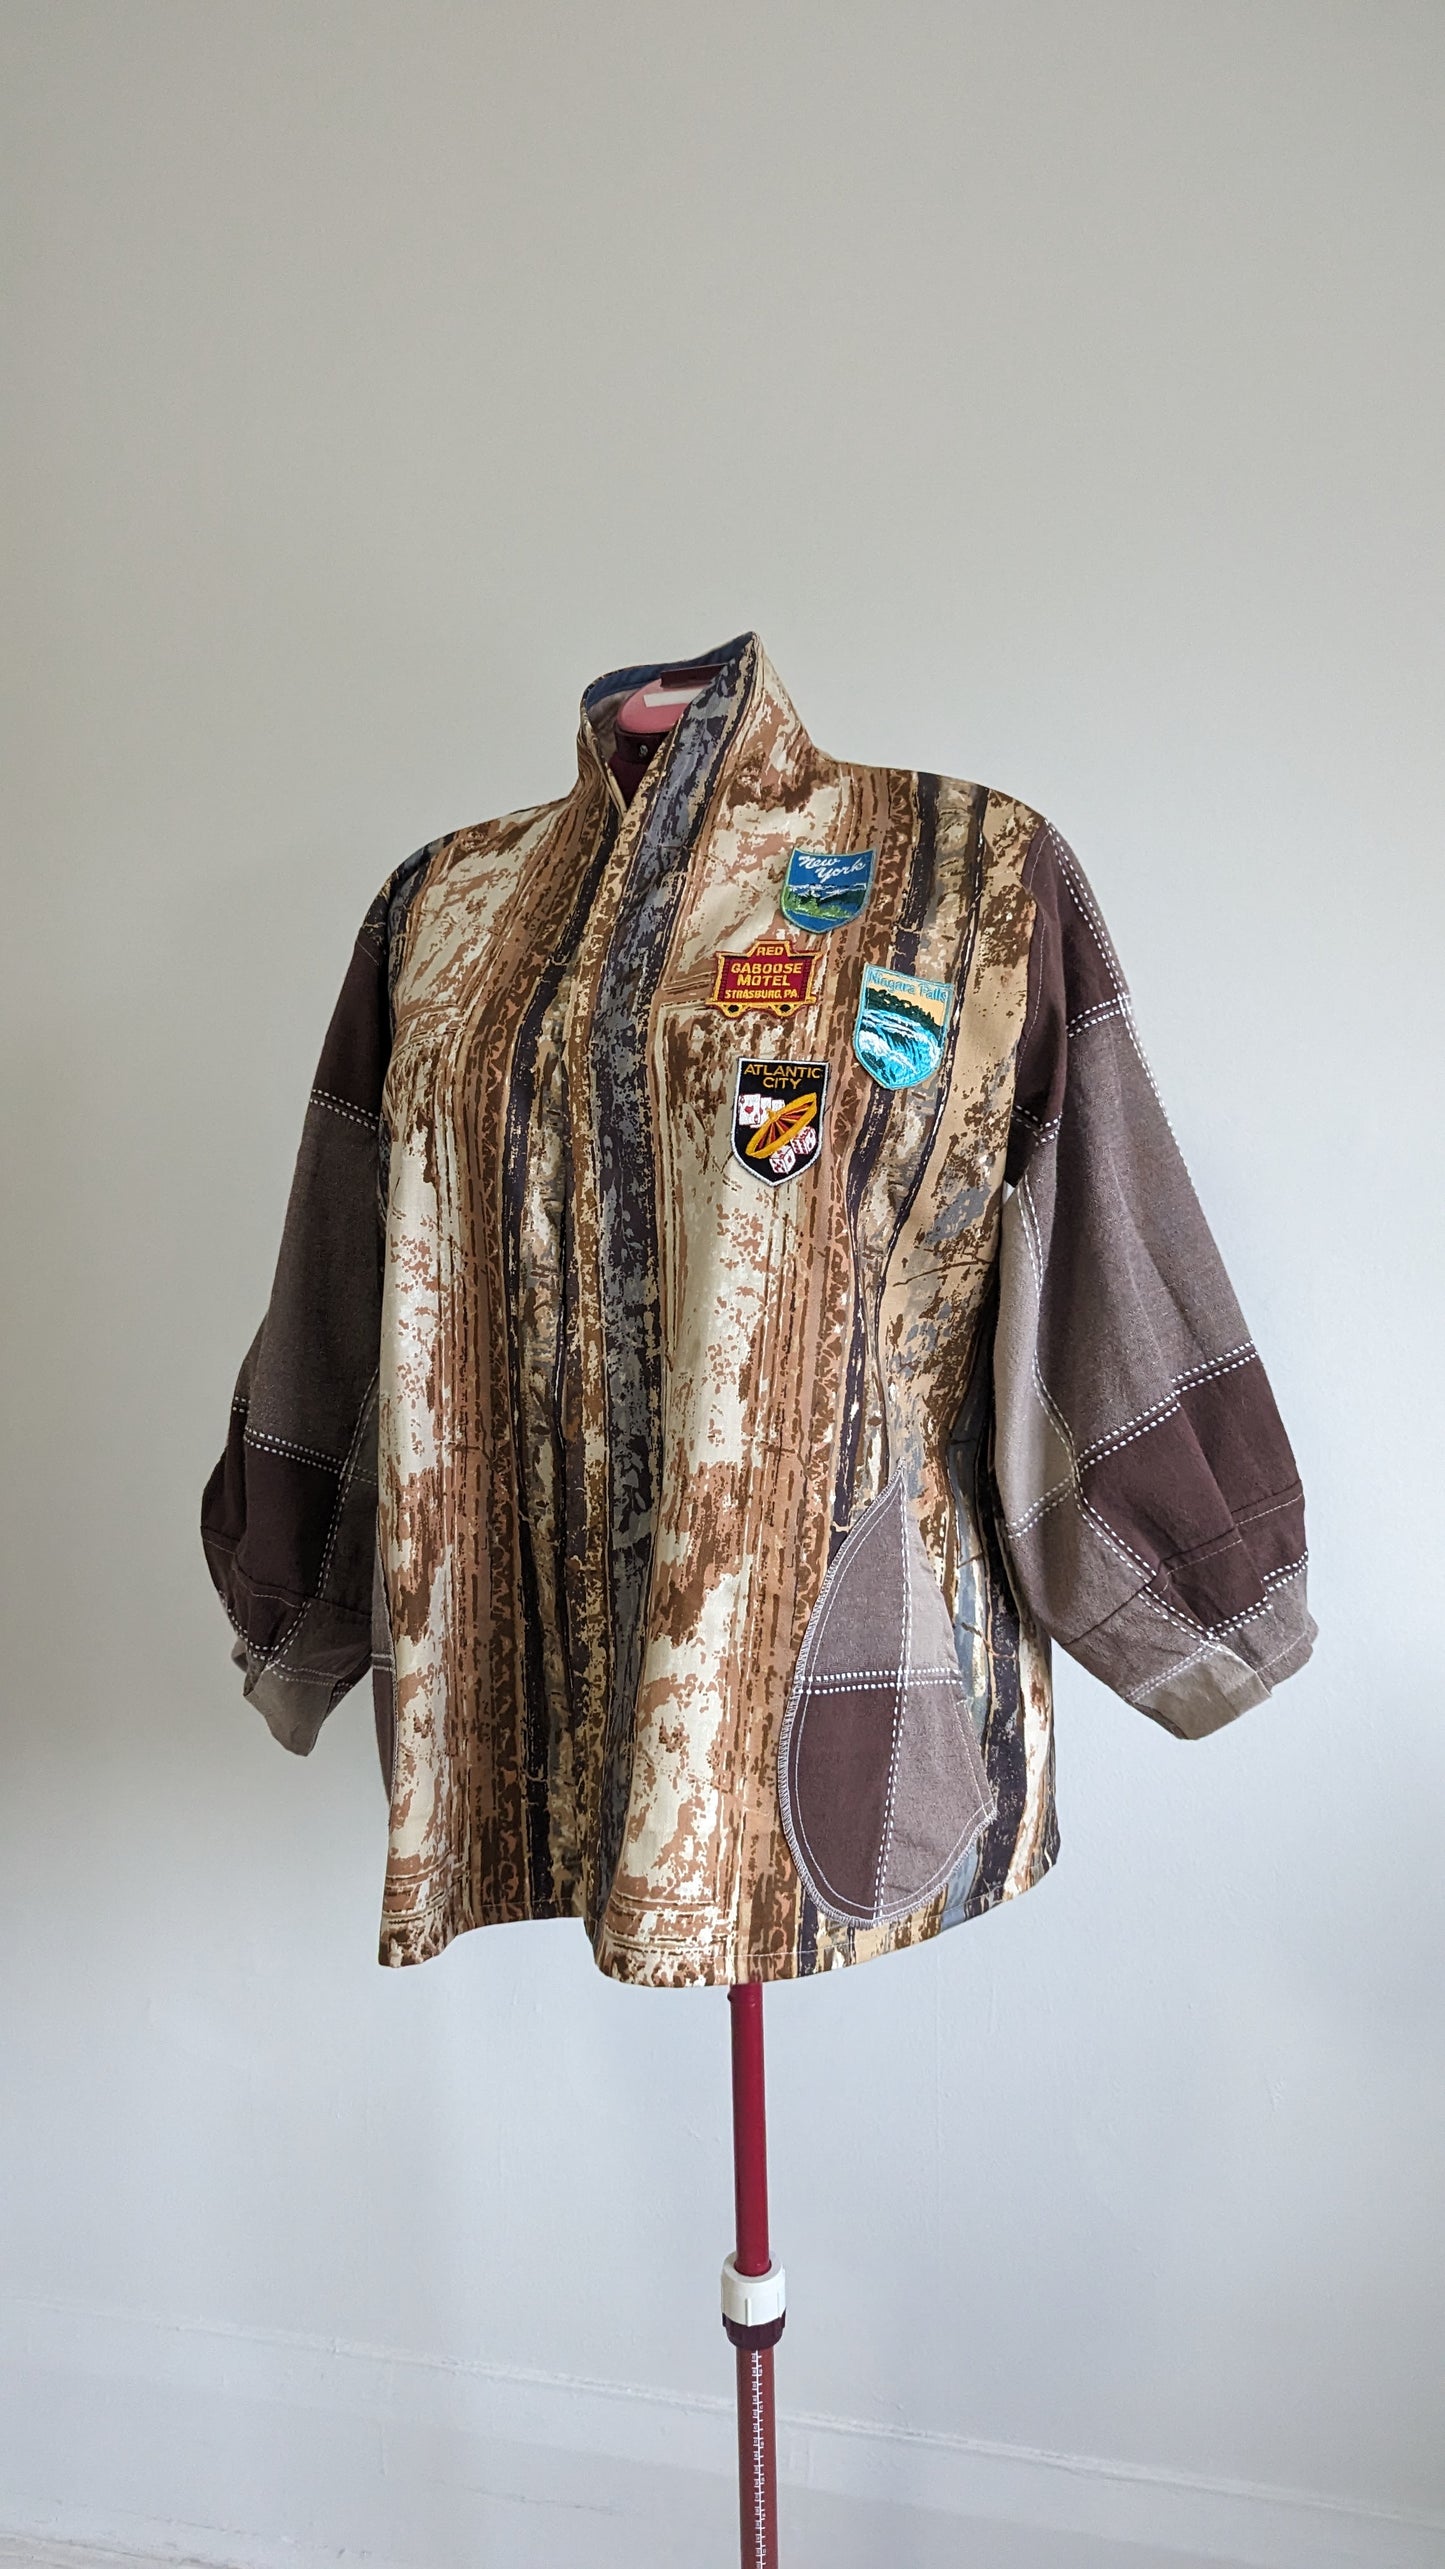 Vivianne Blazer with Upcycled Lightweight Drapery & Vintage Souvenir Travel Patches Size 2X/3X #VIVC6